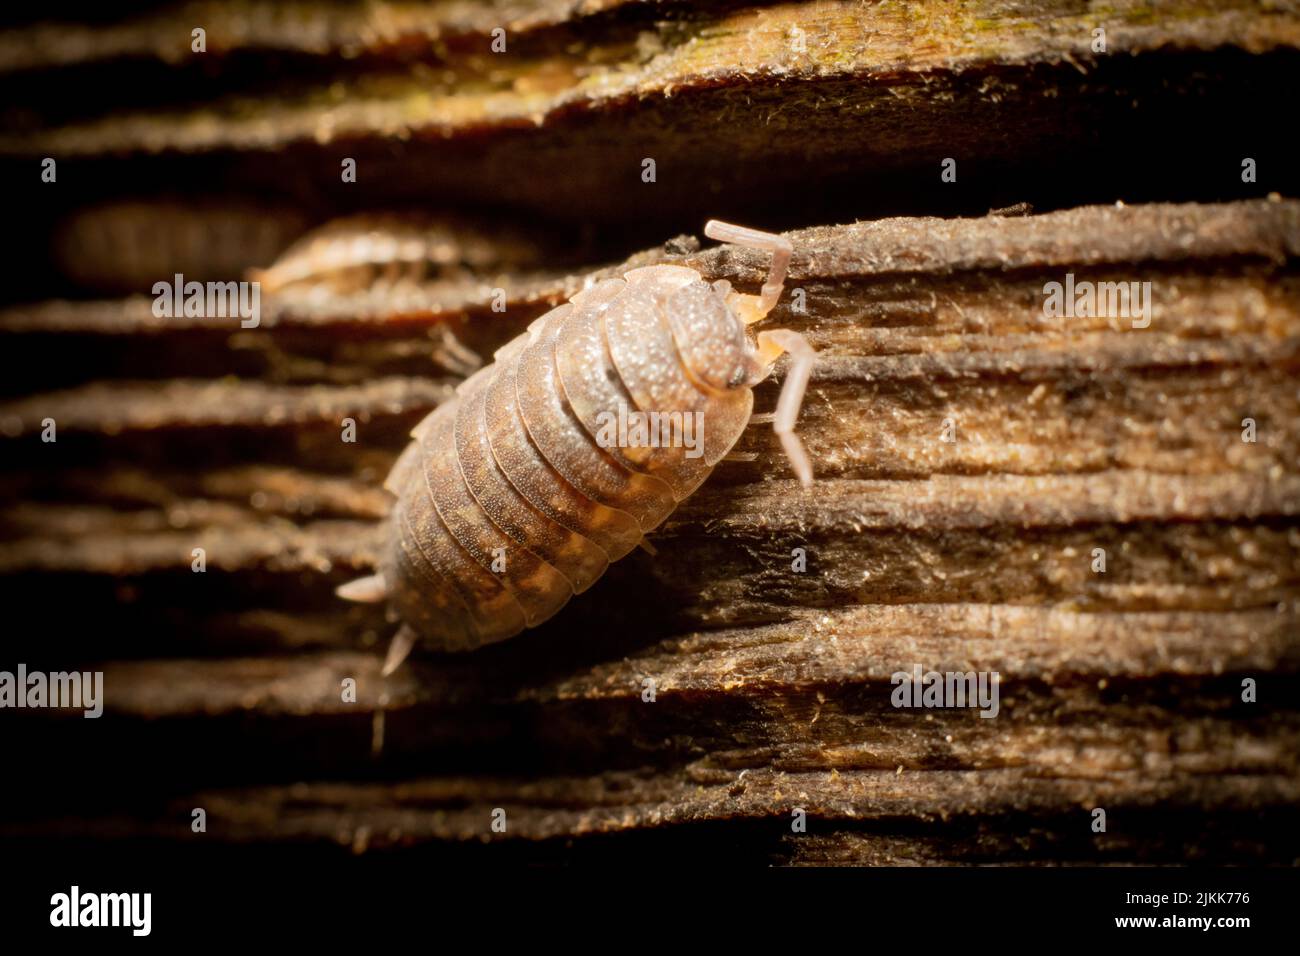 A closeup of a common woodlouse on a wooden surface under the sunlight Stock Photo